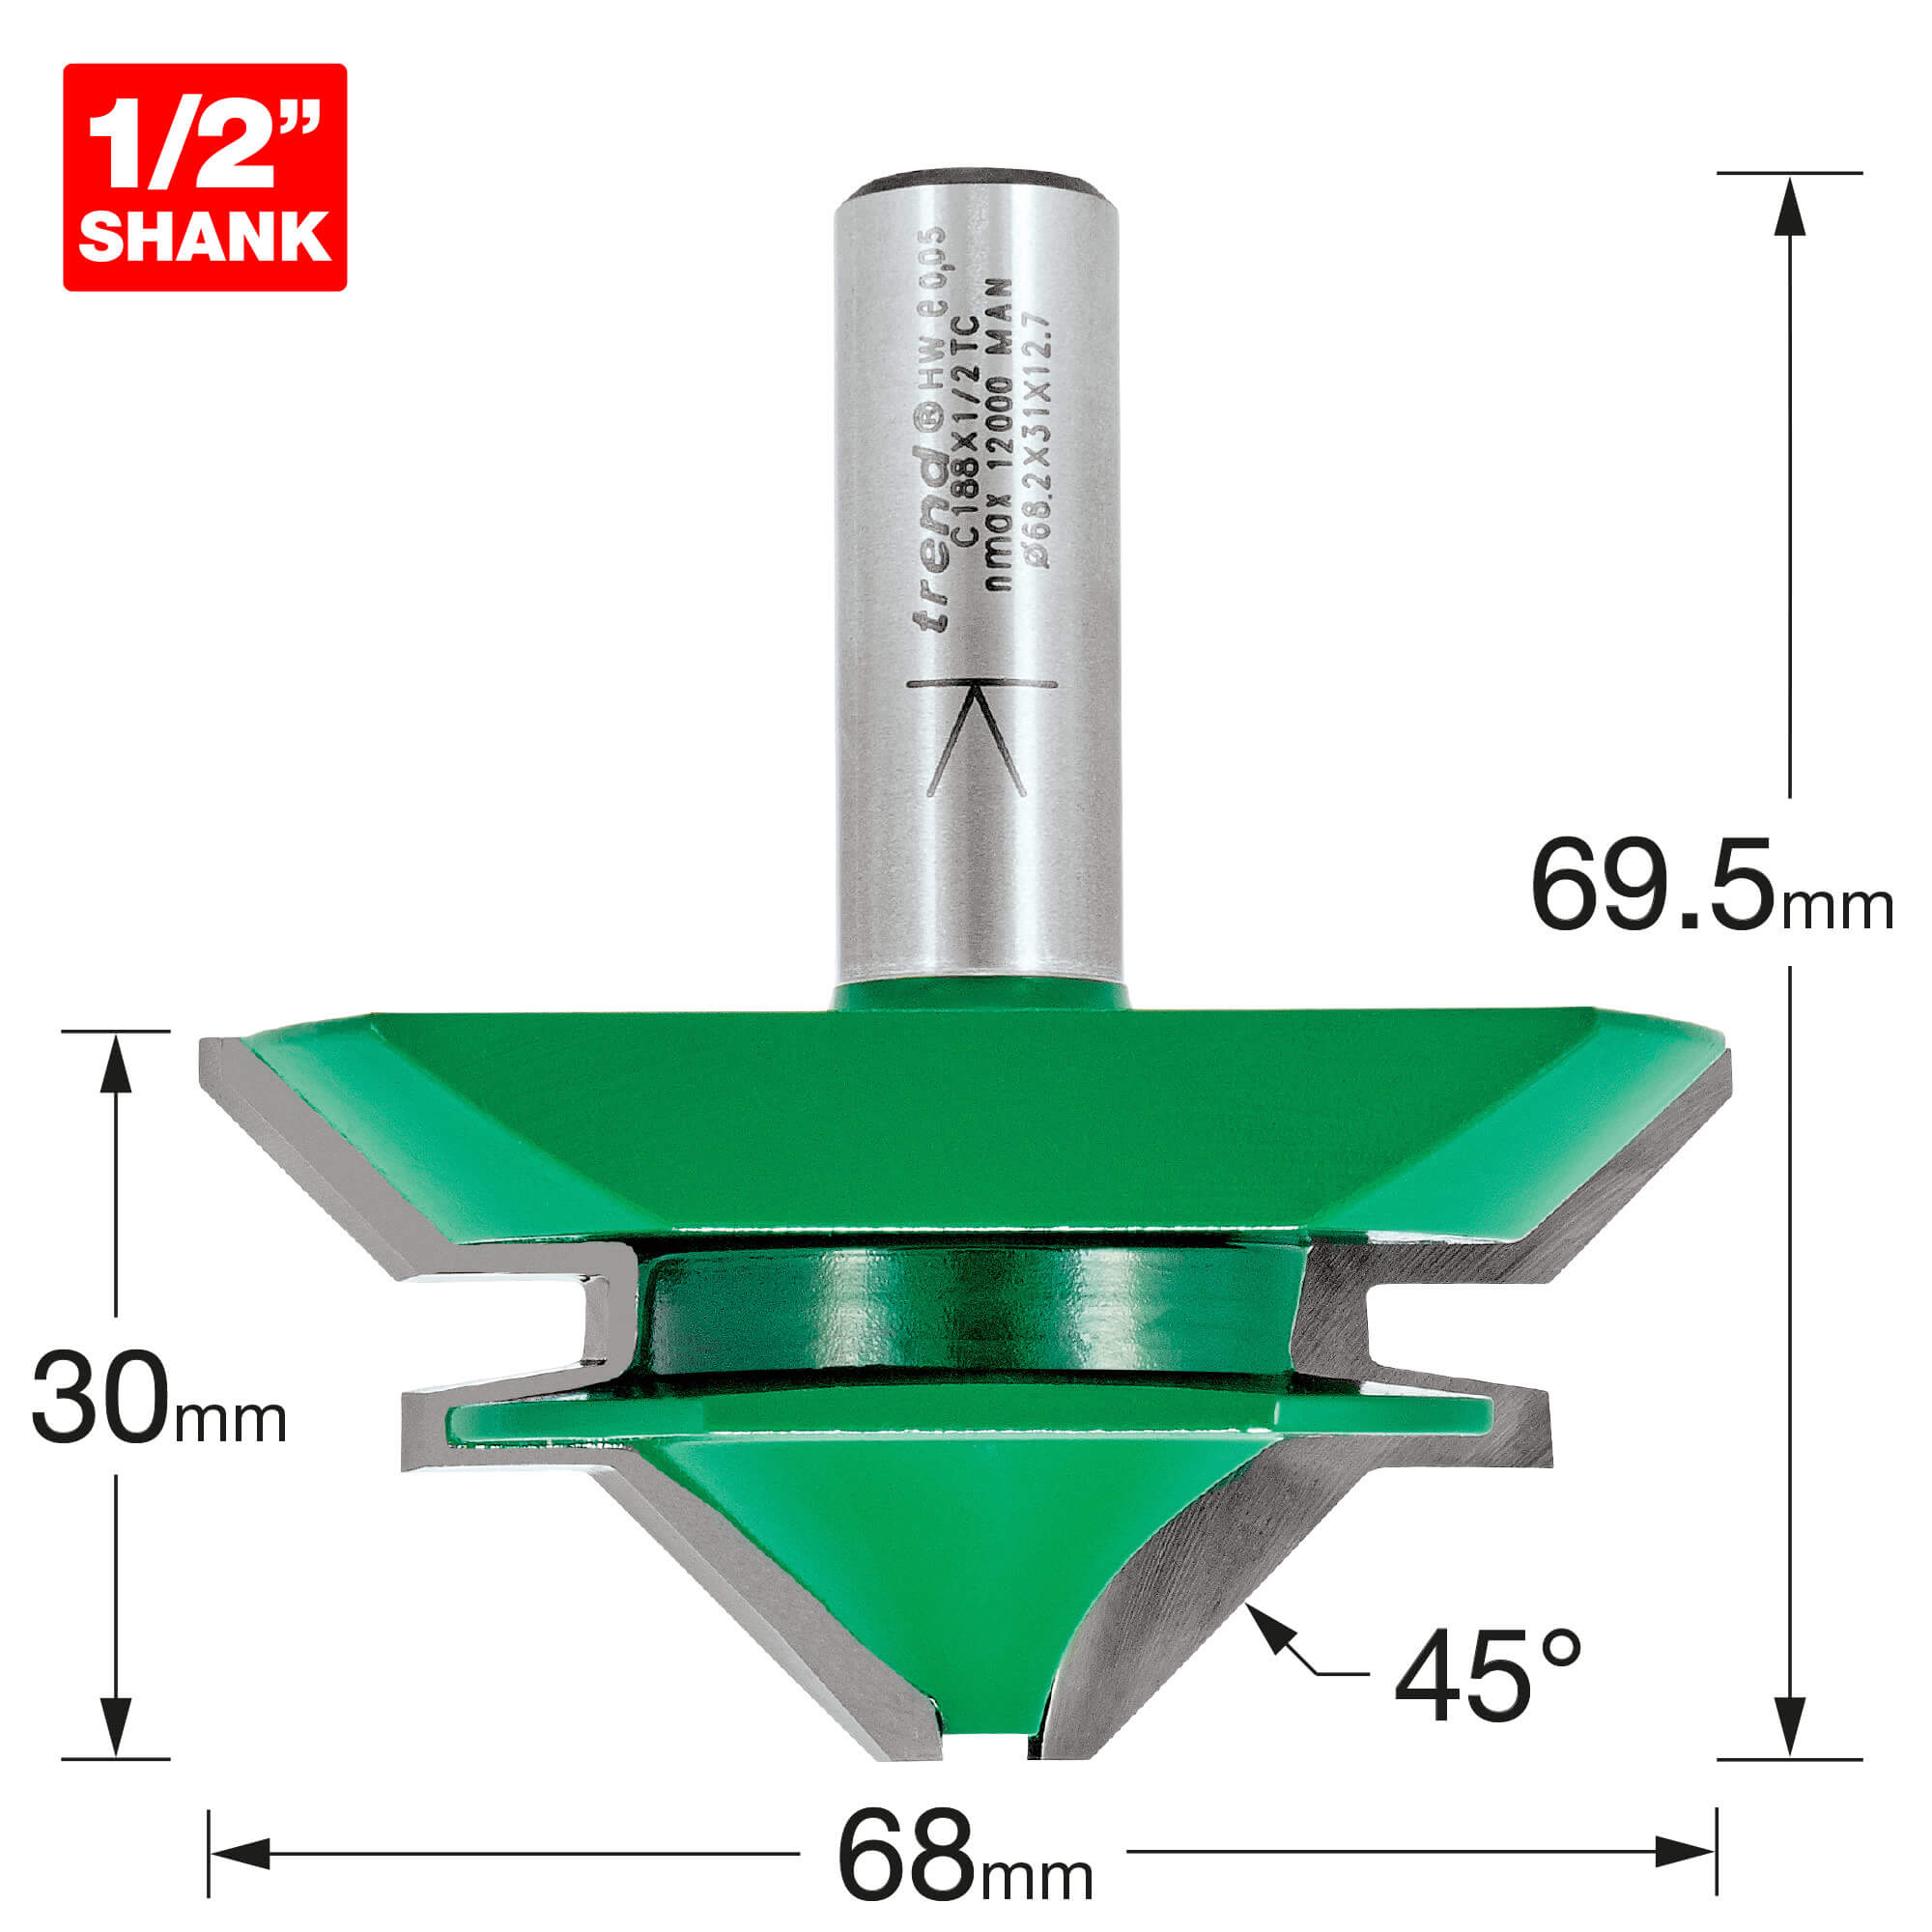 Image of Trend CRAFTPRO Mitre Lock Joint Router Cutter 68mm 30mm 1/2"